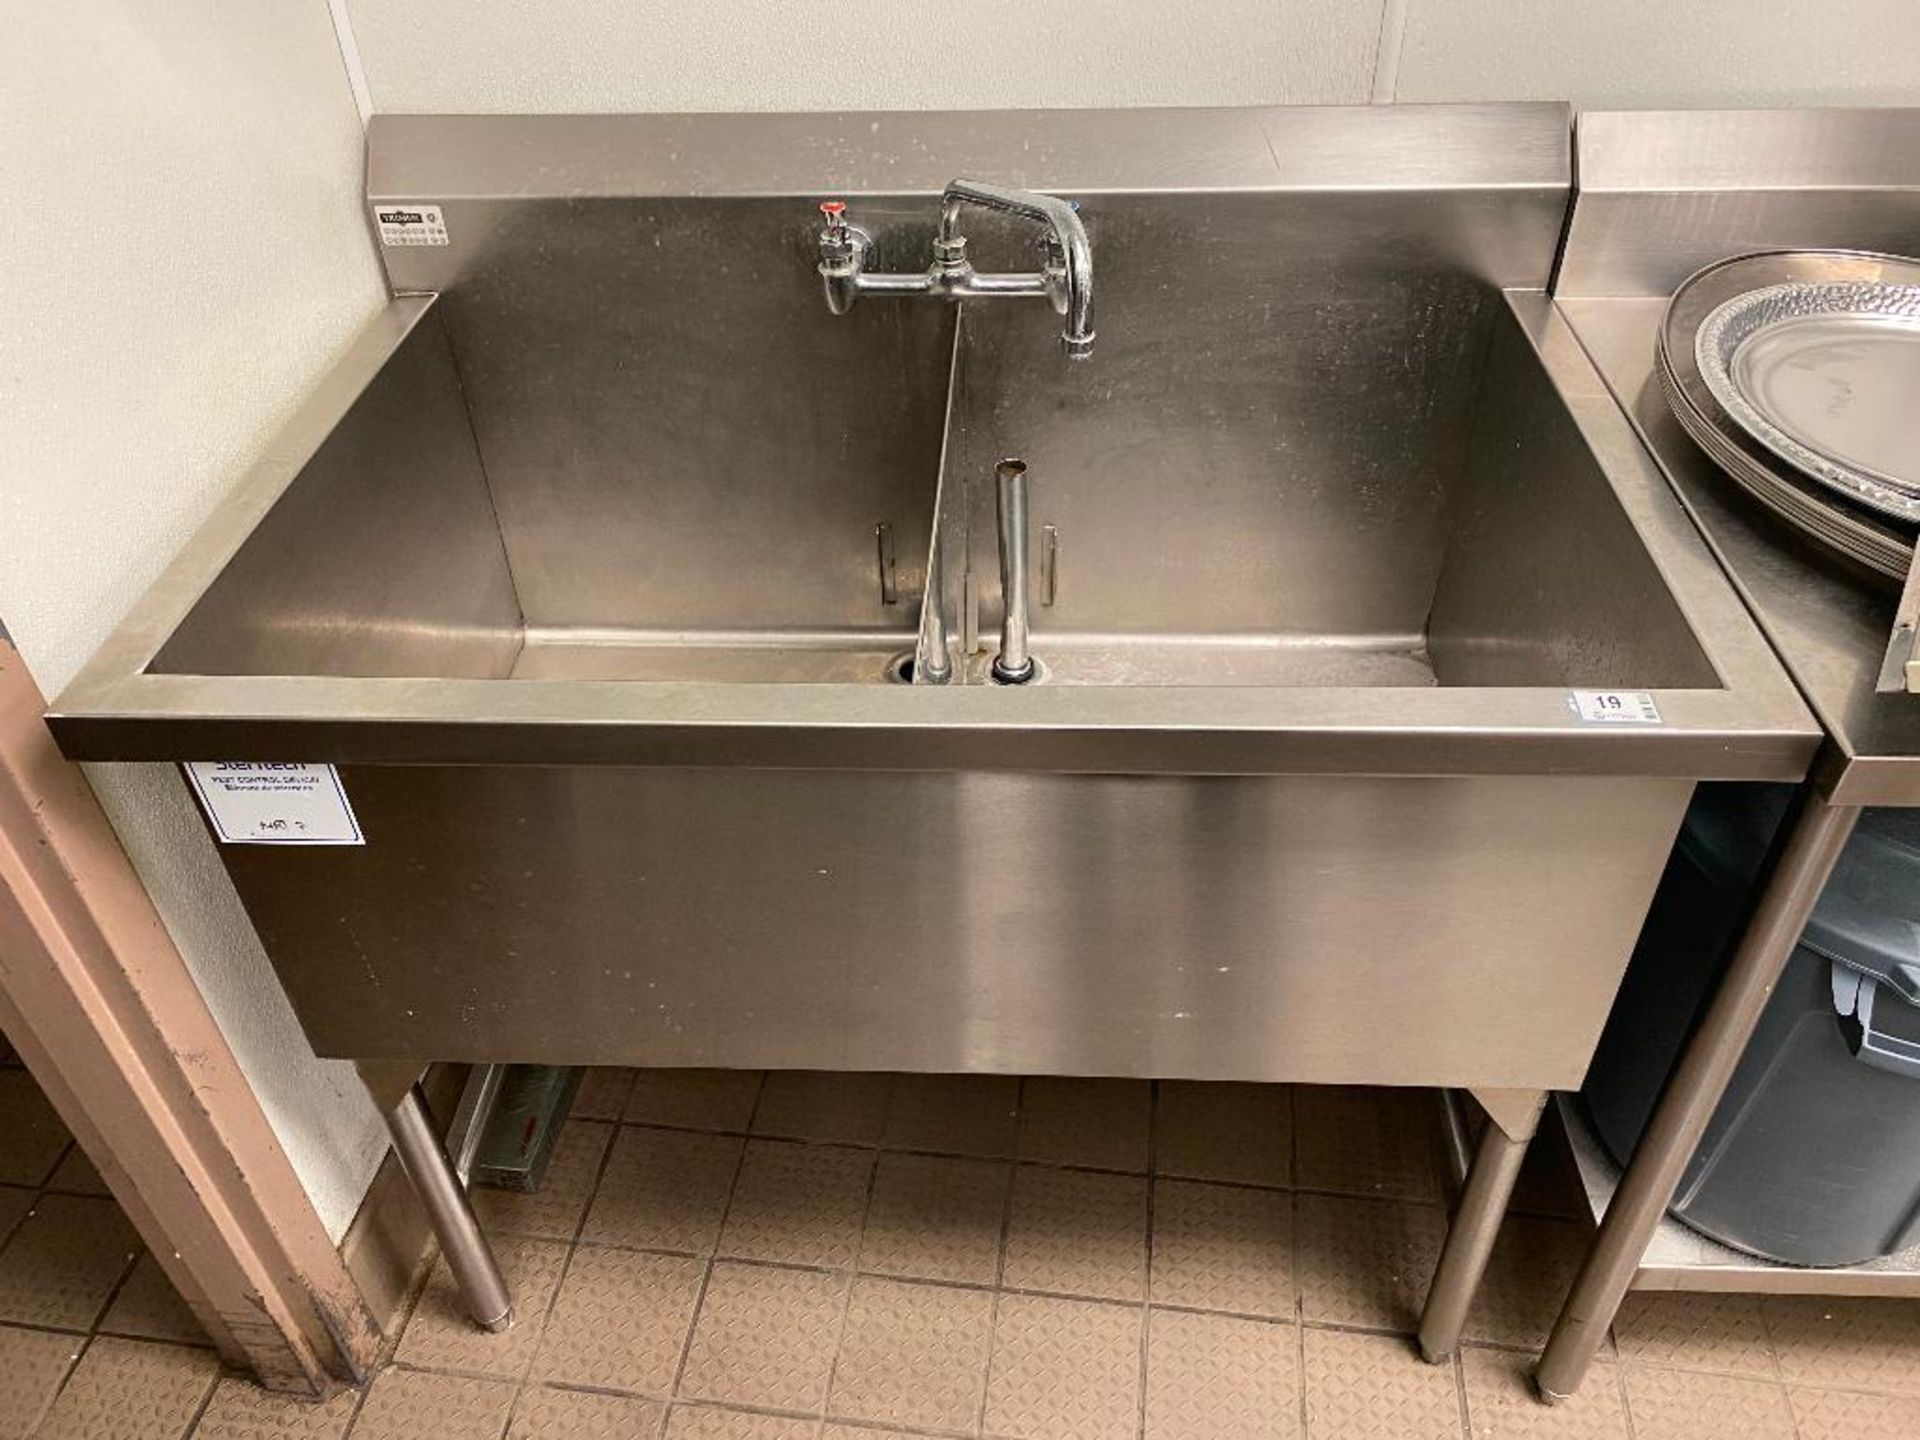 TRIMEN 2 WELL STAINLESS STEEL SINK - NOTE: REQUIRES DISCONNECT, PLEASE INSPECT - Image 2 of 3